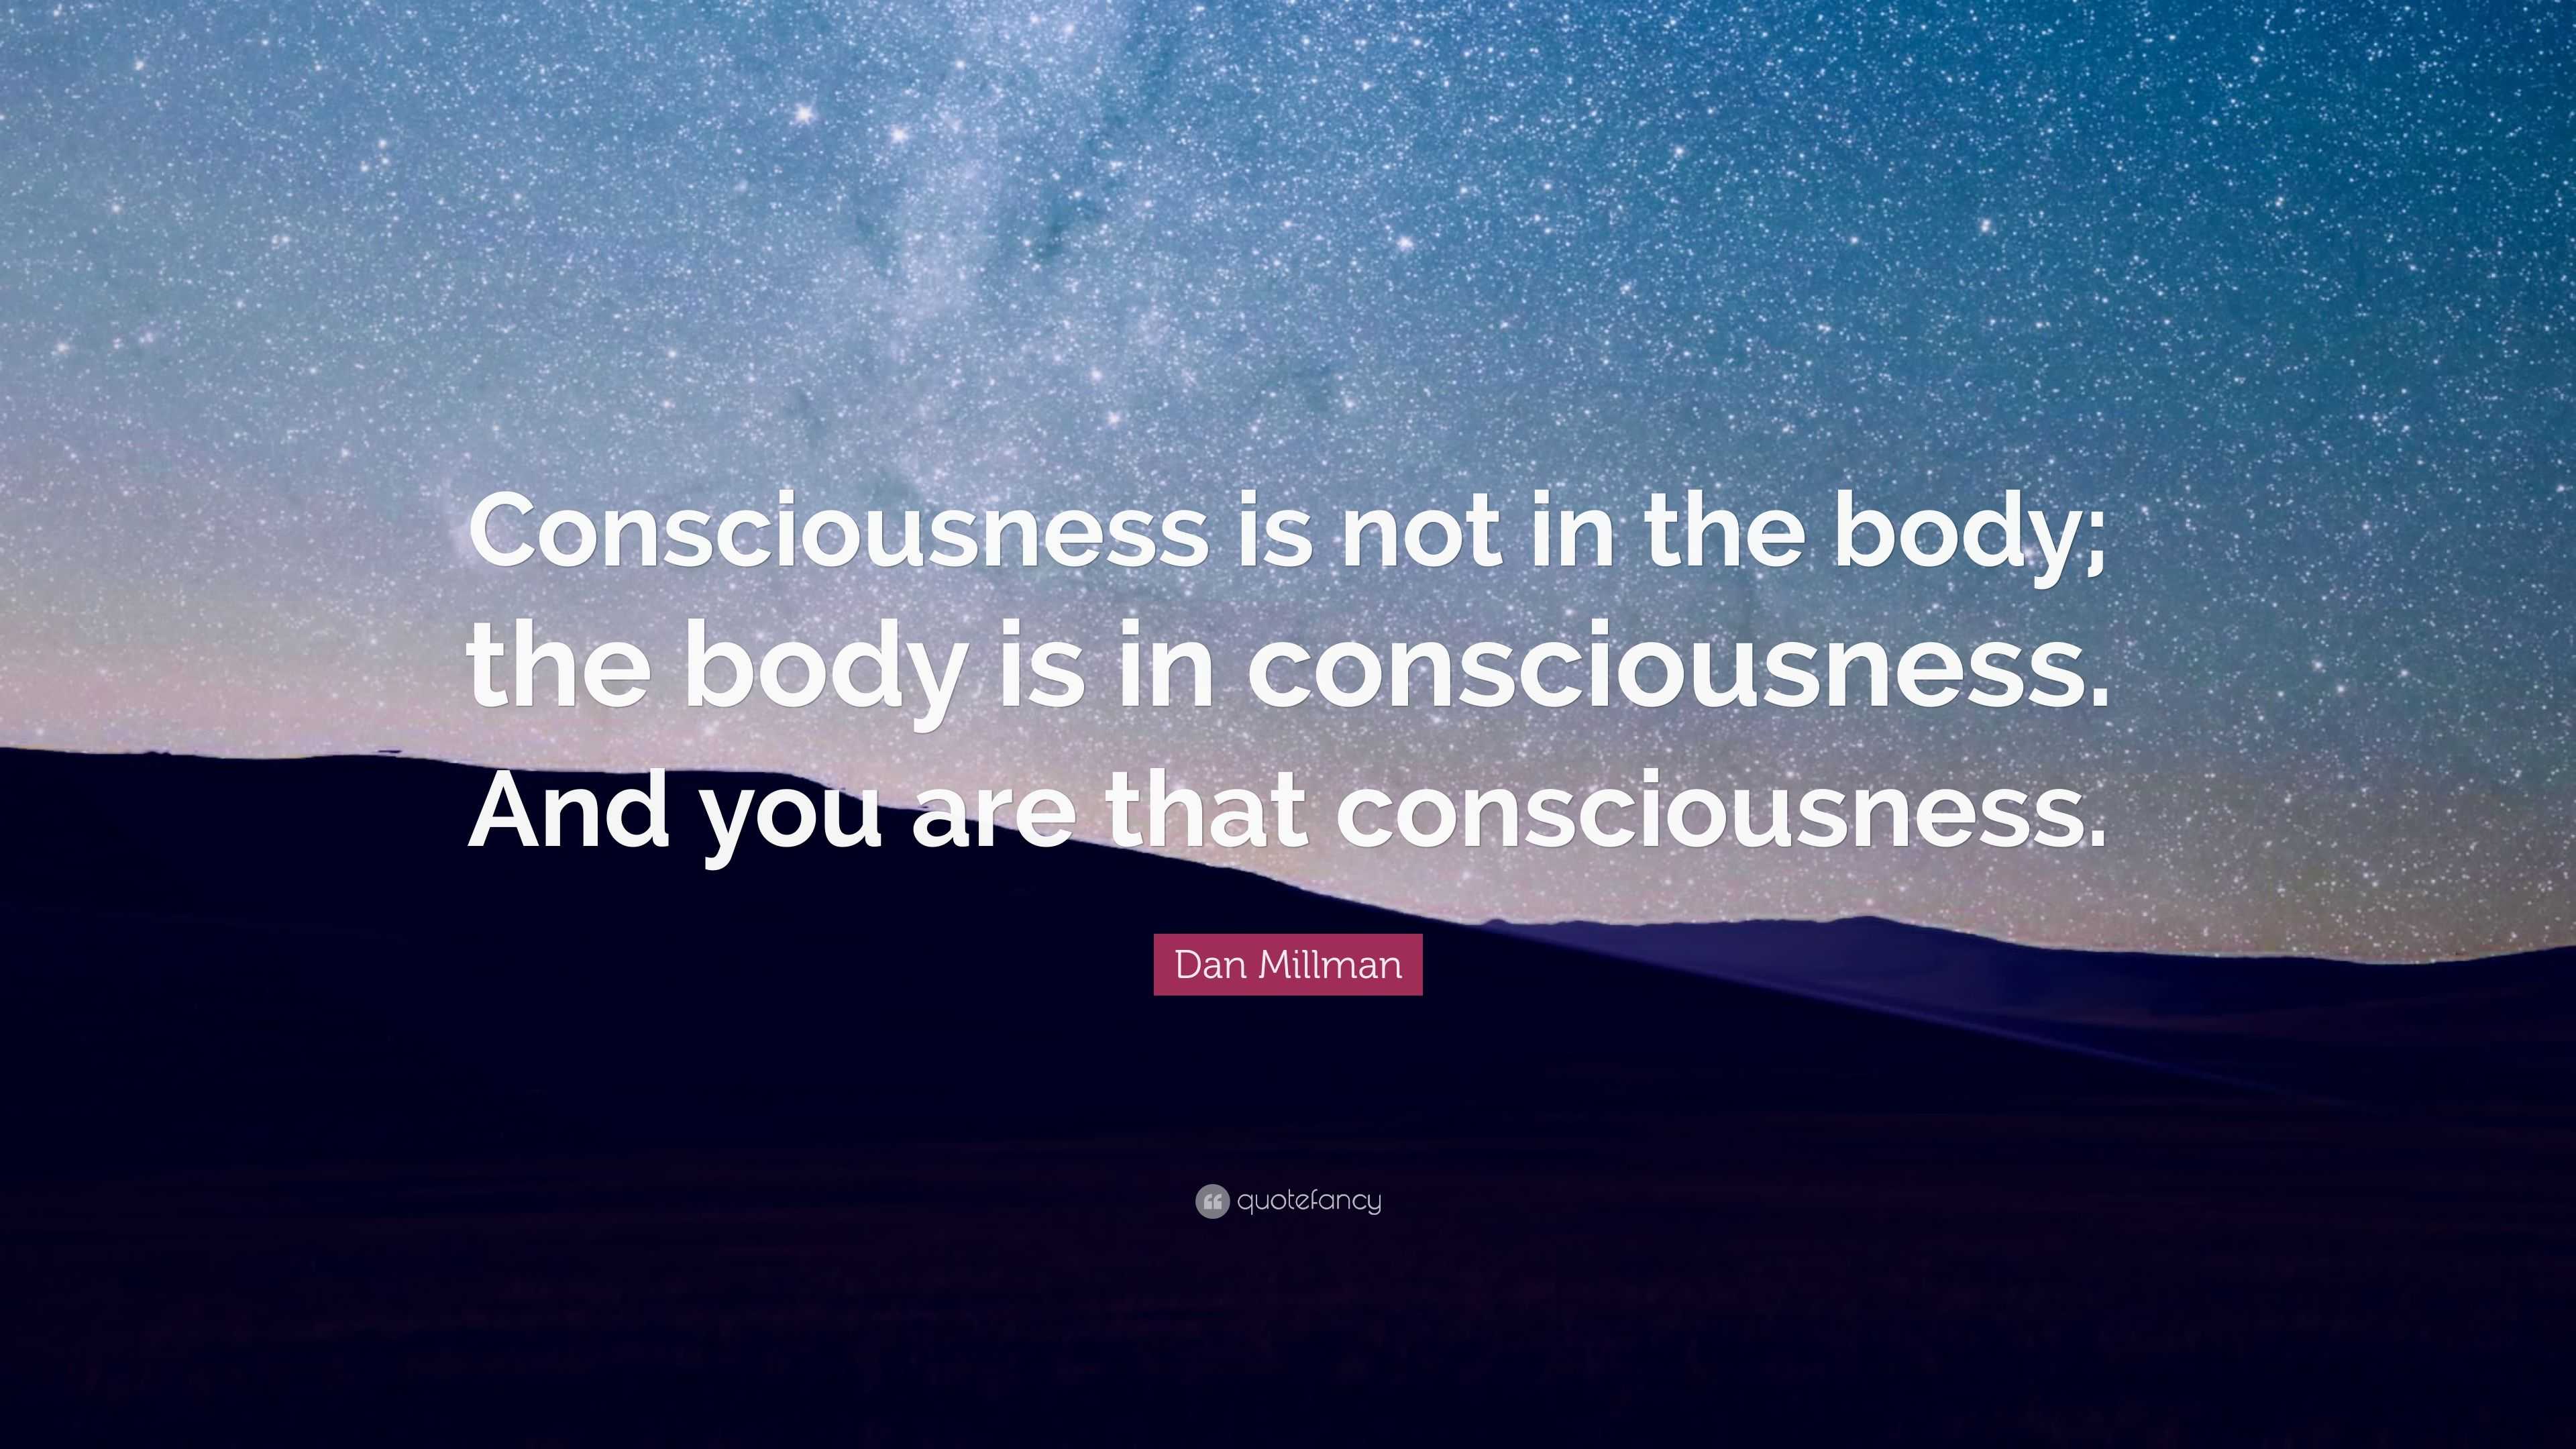 Dan Millman Quote: “Consciousness is not in the body; the body is in ...